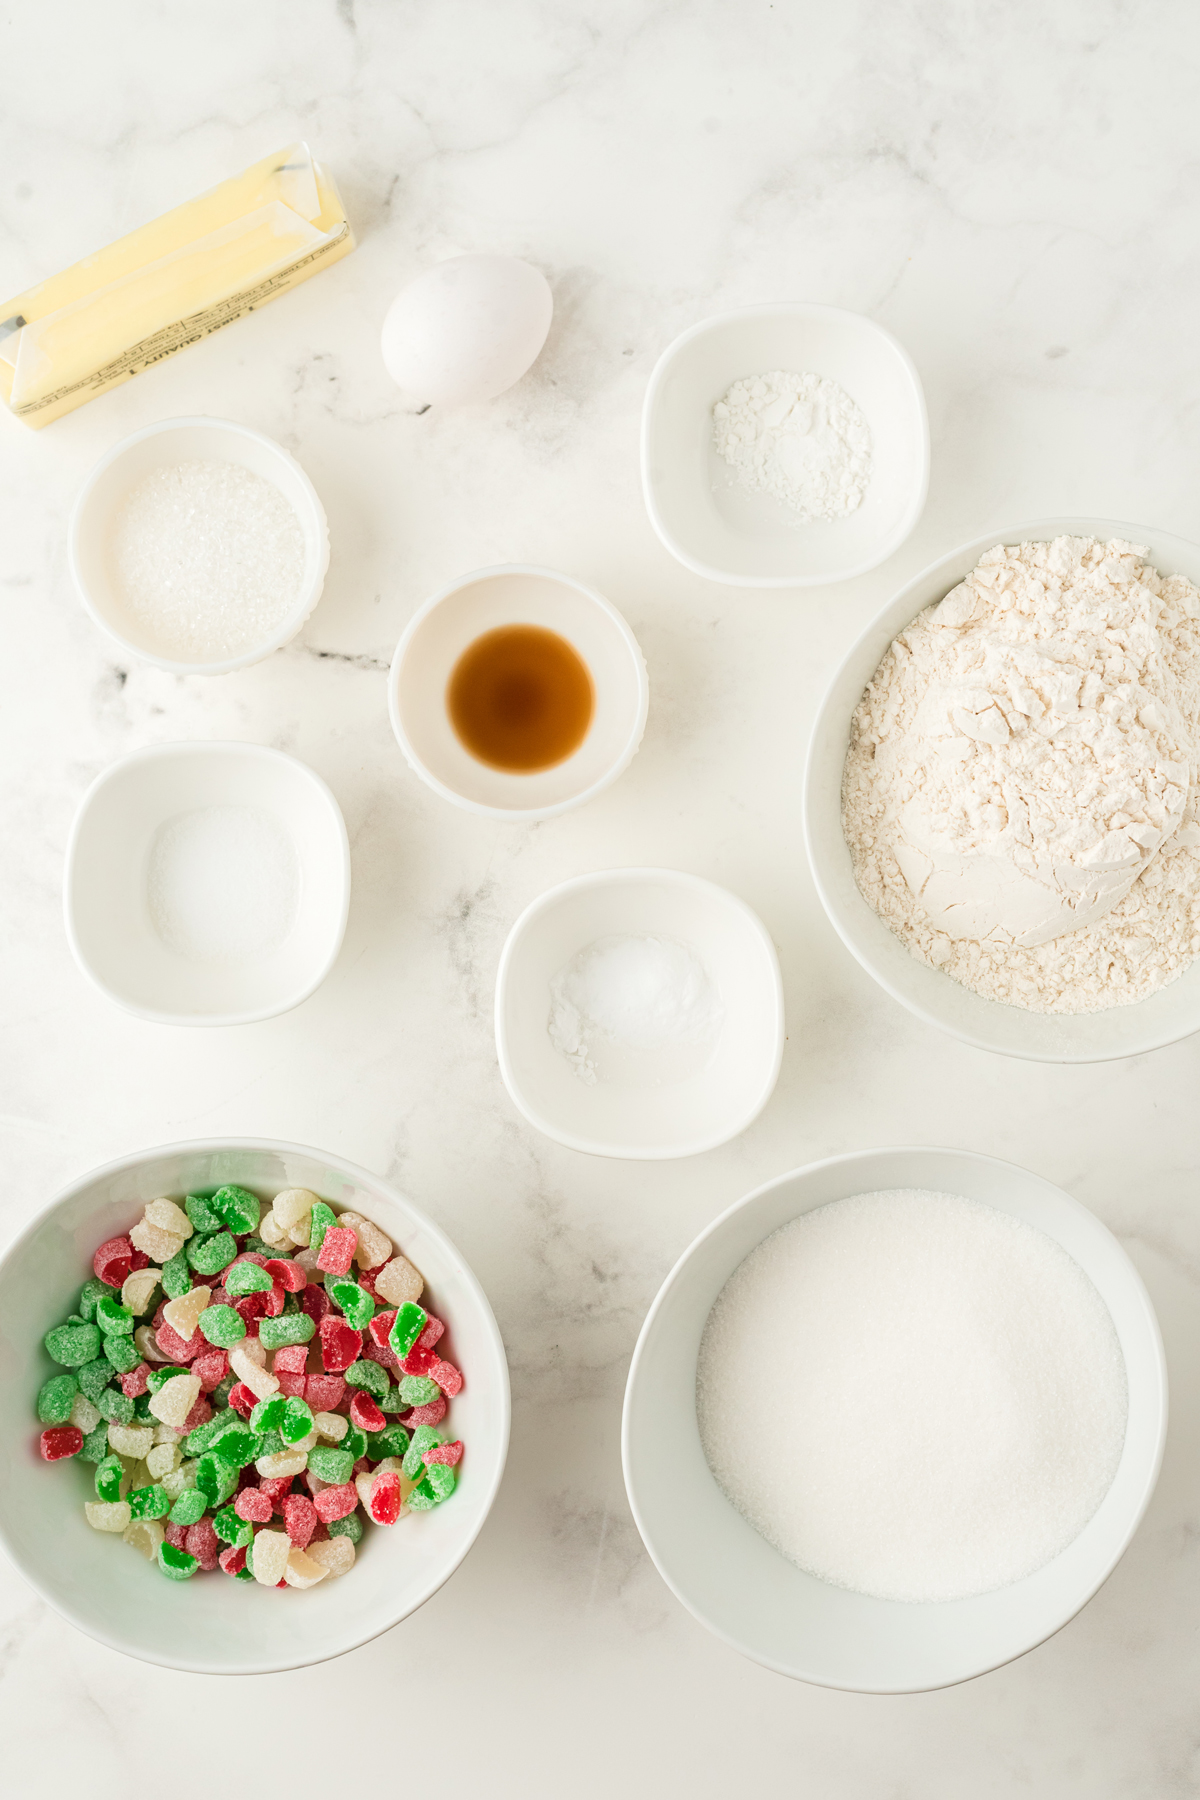 Ingredients of Gum Drop Cookies recipe on a white counter. These are cup of all-purpose flour, baking soda, salt, butter, granulated sugar, egg, vanilla extract, greenm red and white-spiced flavored gumdrops, and white sugar.